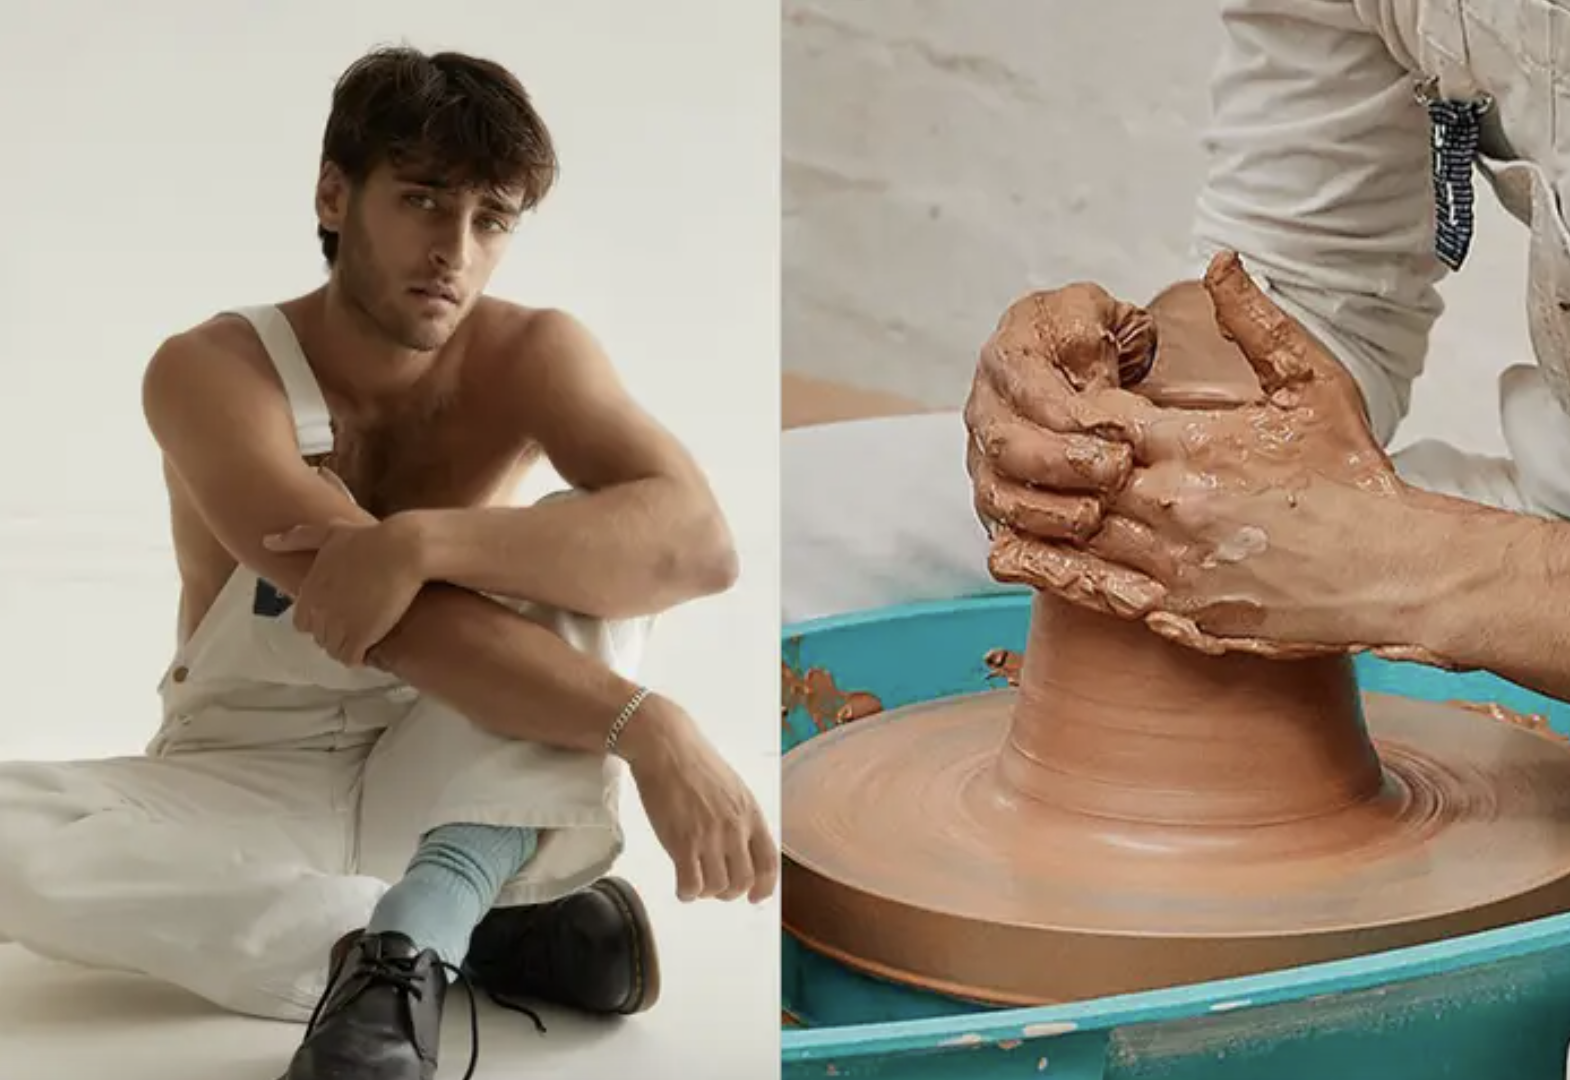 on the left: a shirtless man in white overalls; on the right: a phallic looking lump of clay being massaged on a pottery wheel